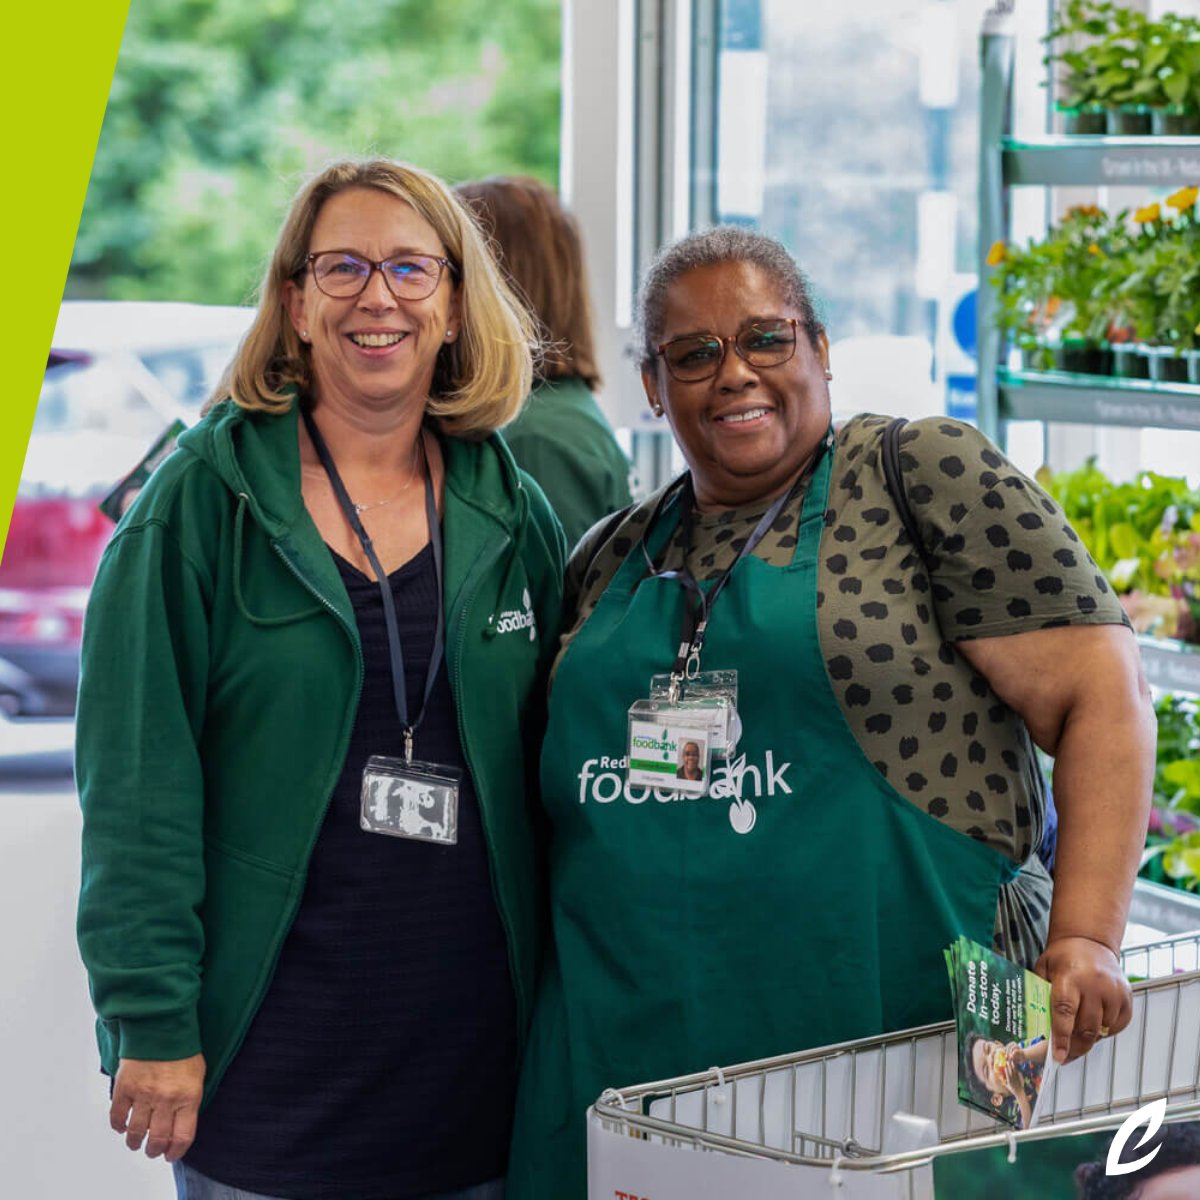 📣 Industry News 📣

In response to the rising cost of living crisis, @Tesco has provided over 730,000 meals to the UK food bank, @TrussellTrust. 🥫

#foodbanks #fooddonations #emergencyresponse